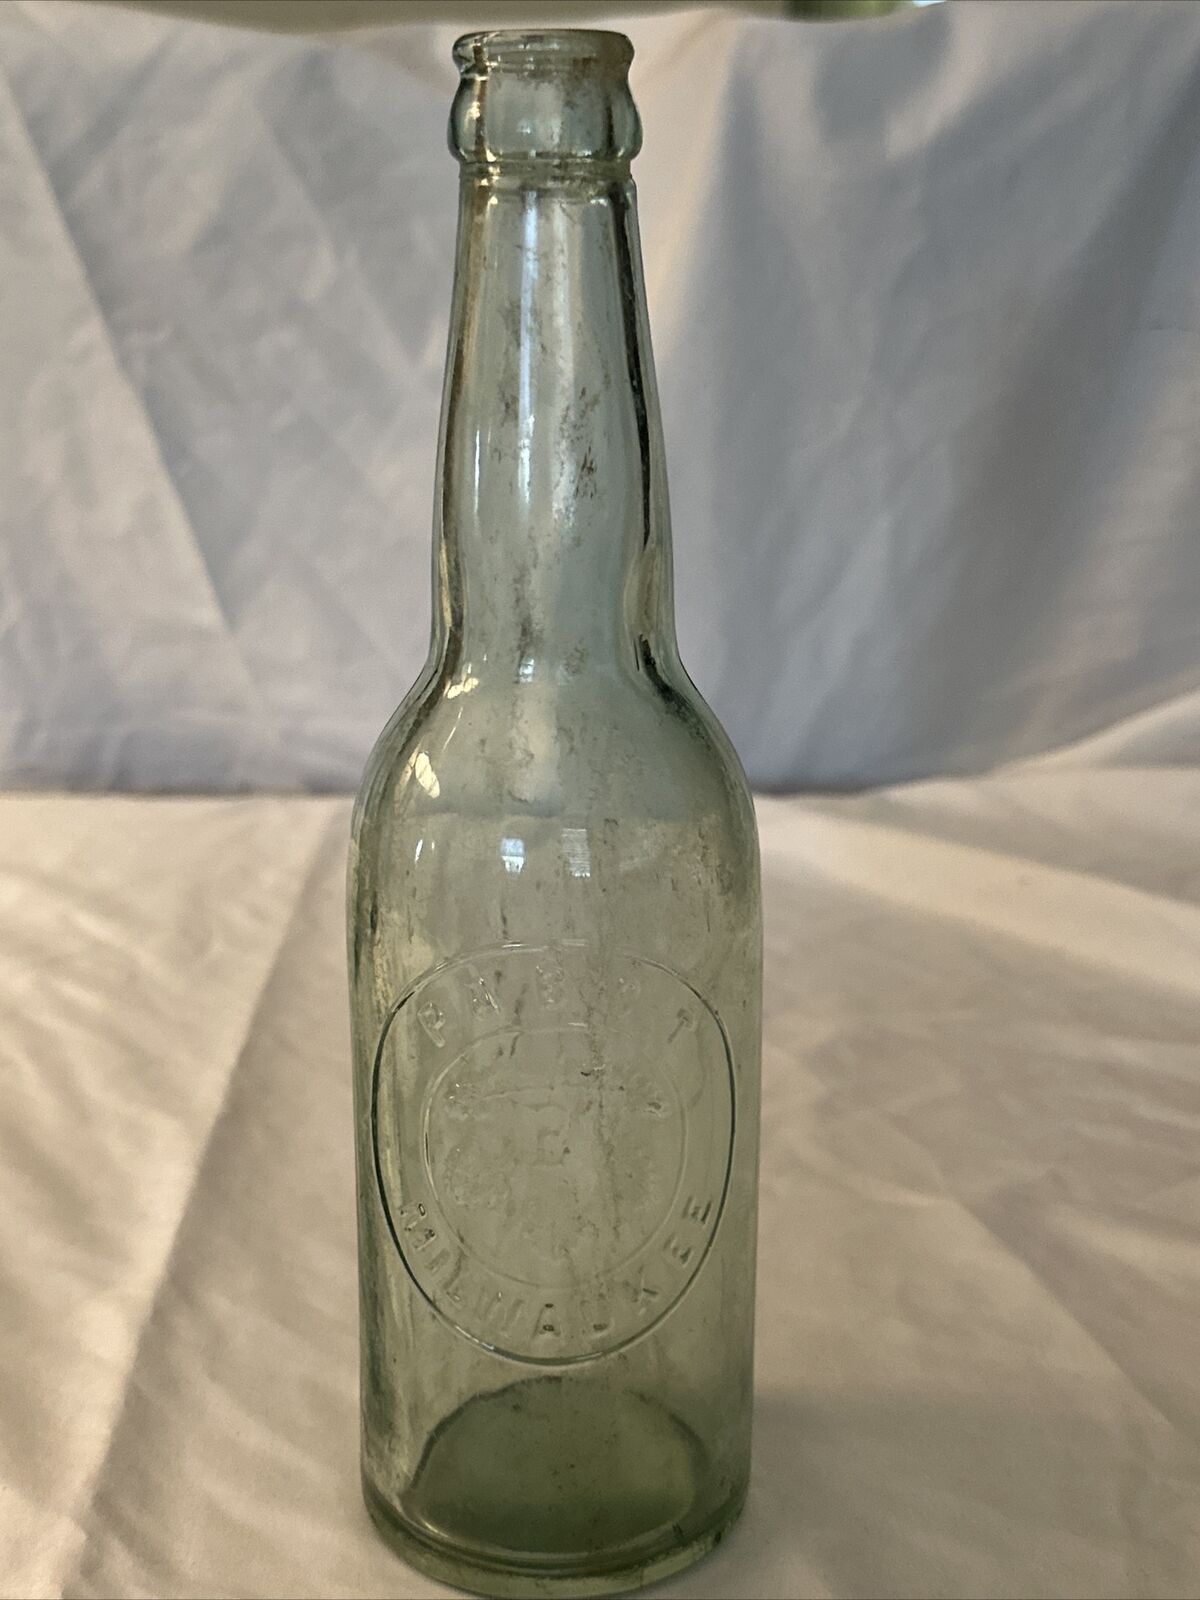 Vintage Pabst Blue Ribbon Bottle Pabst Brewing Company Milwaukee